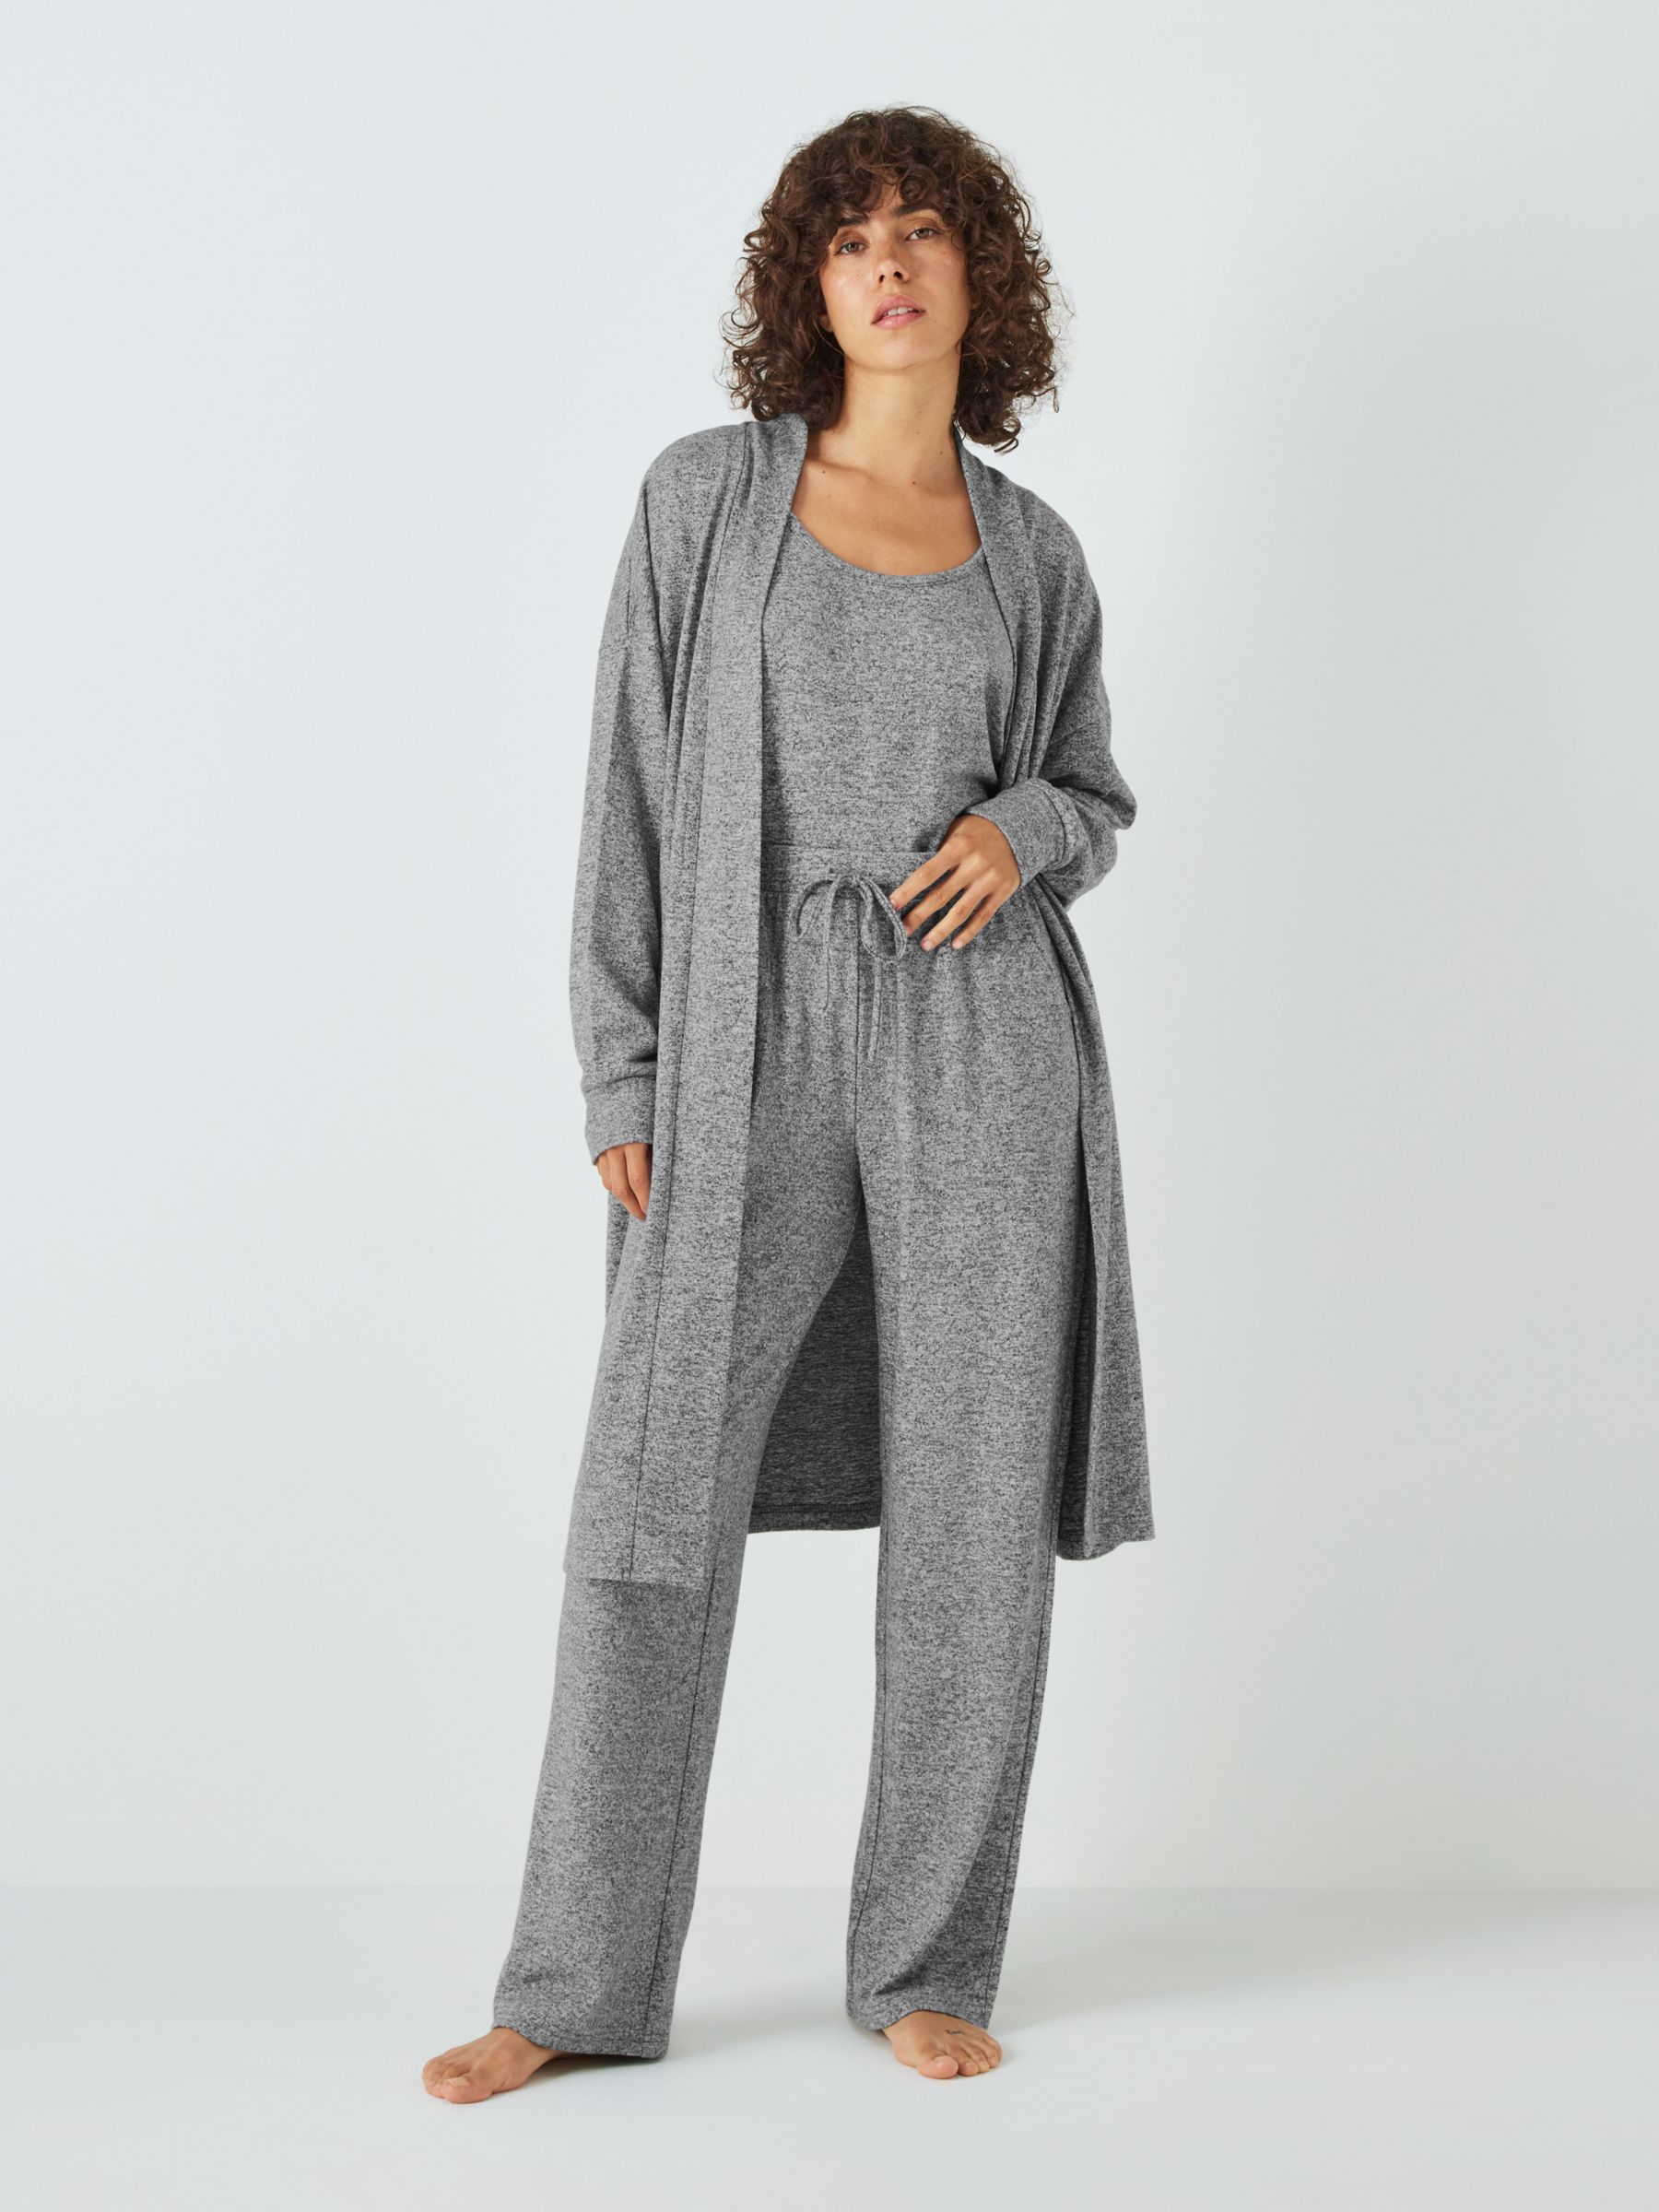 Spanx Fans Love This Cozy Loungewear Set